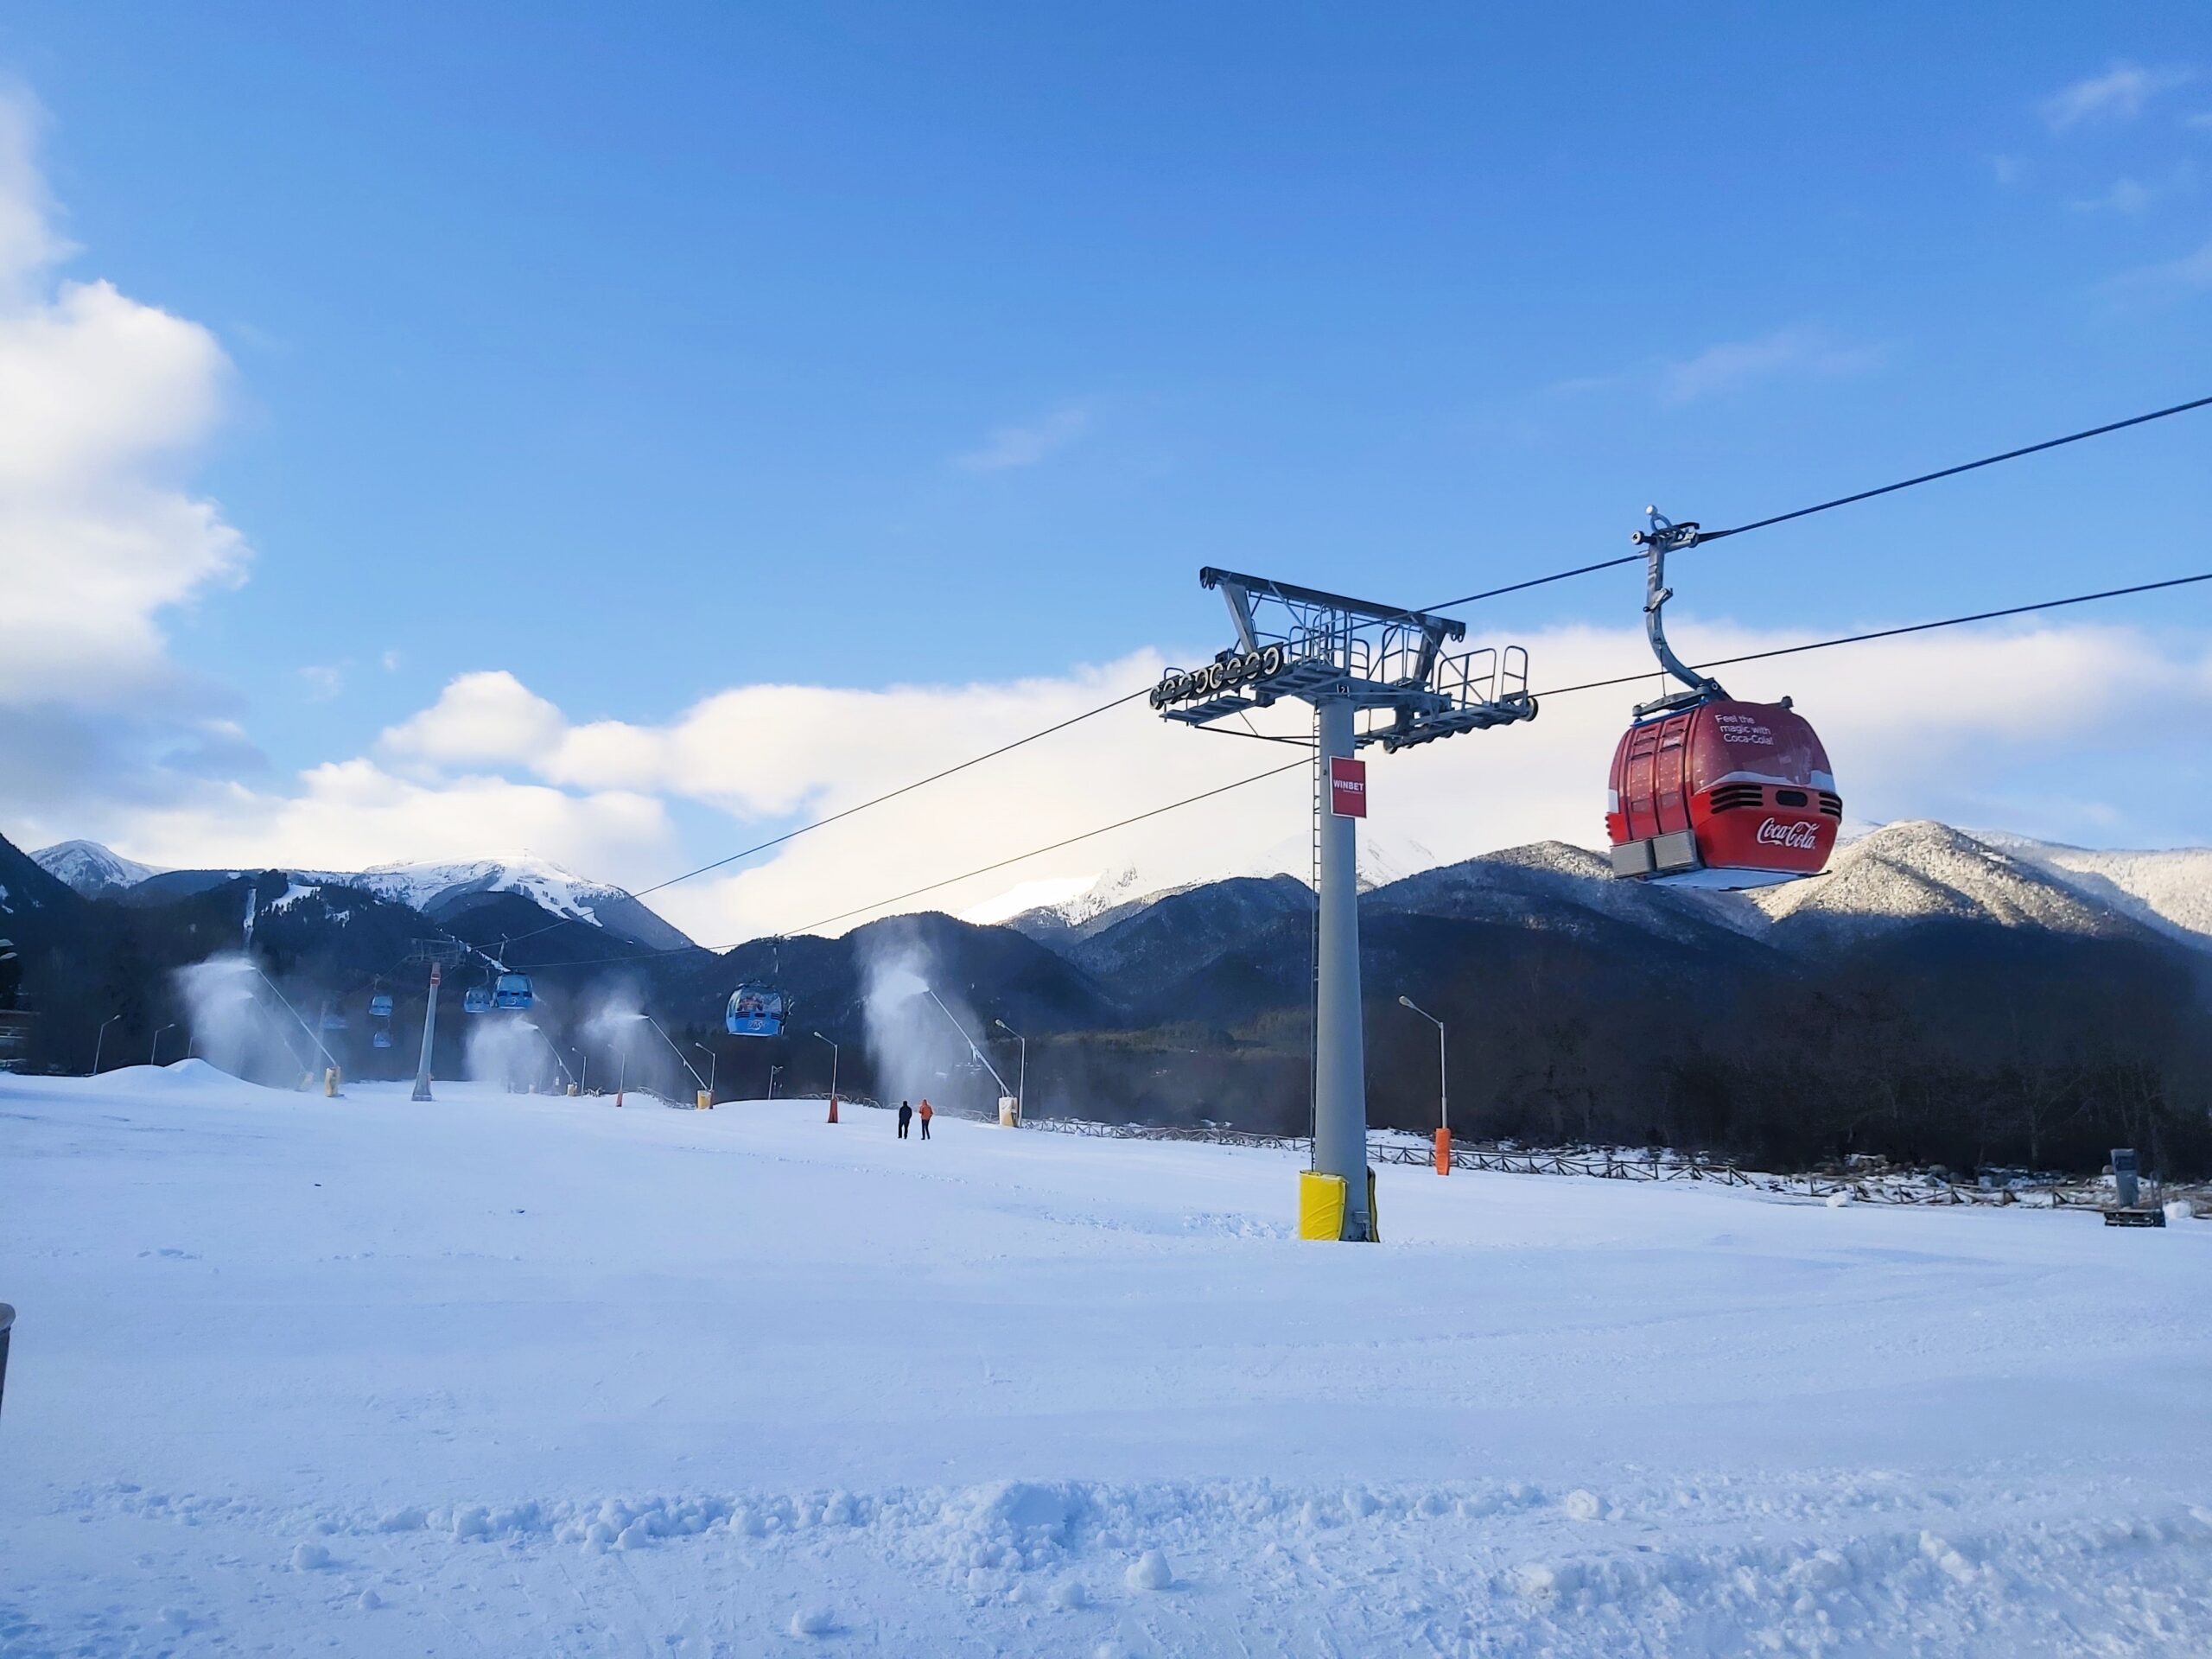 A red gondola at the bottom of the mountain in Bansko, Bulgaria